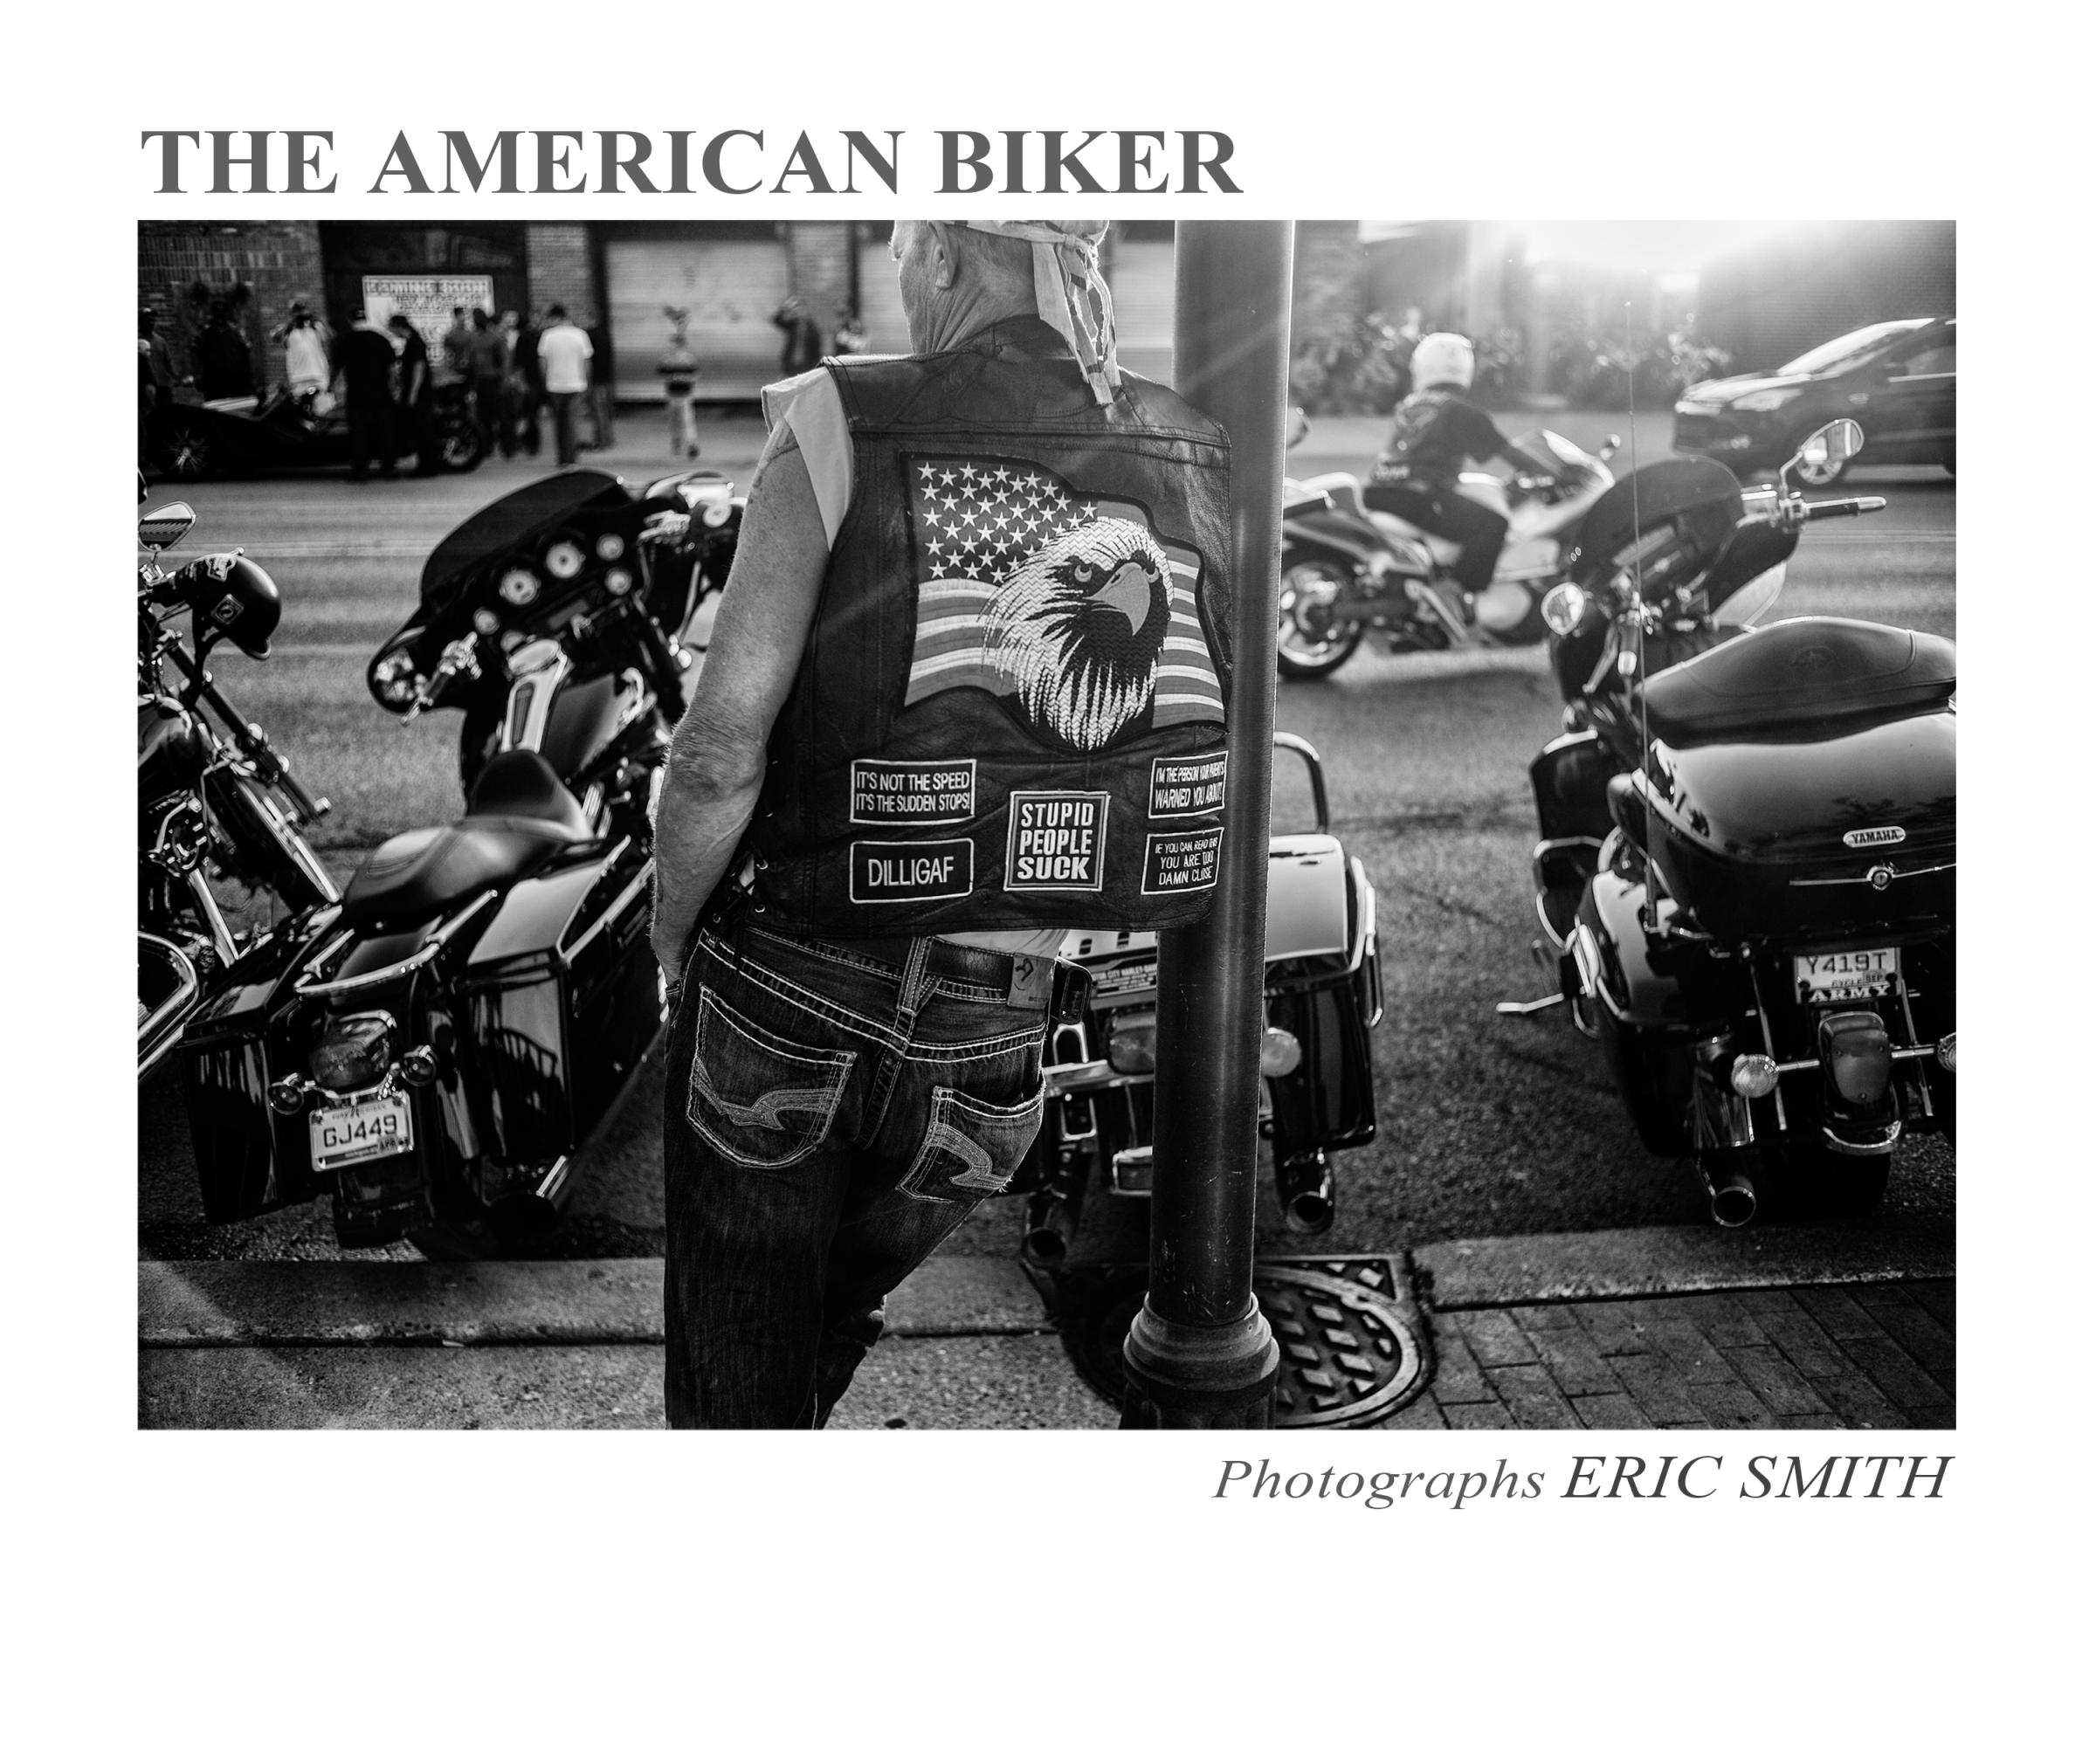 The American Biker - A book of B/W photographs about the Biker Culture in...